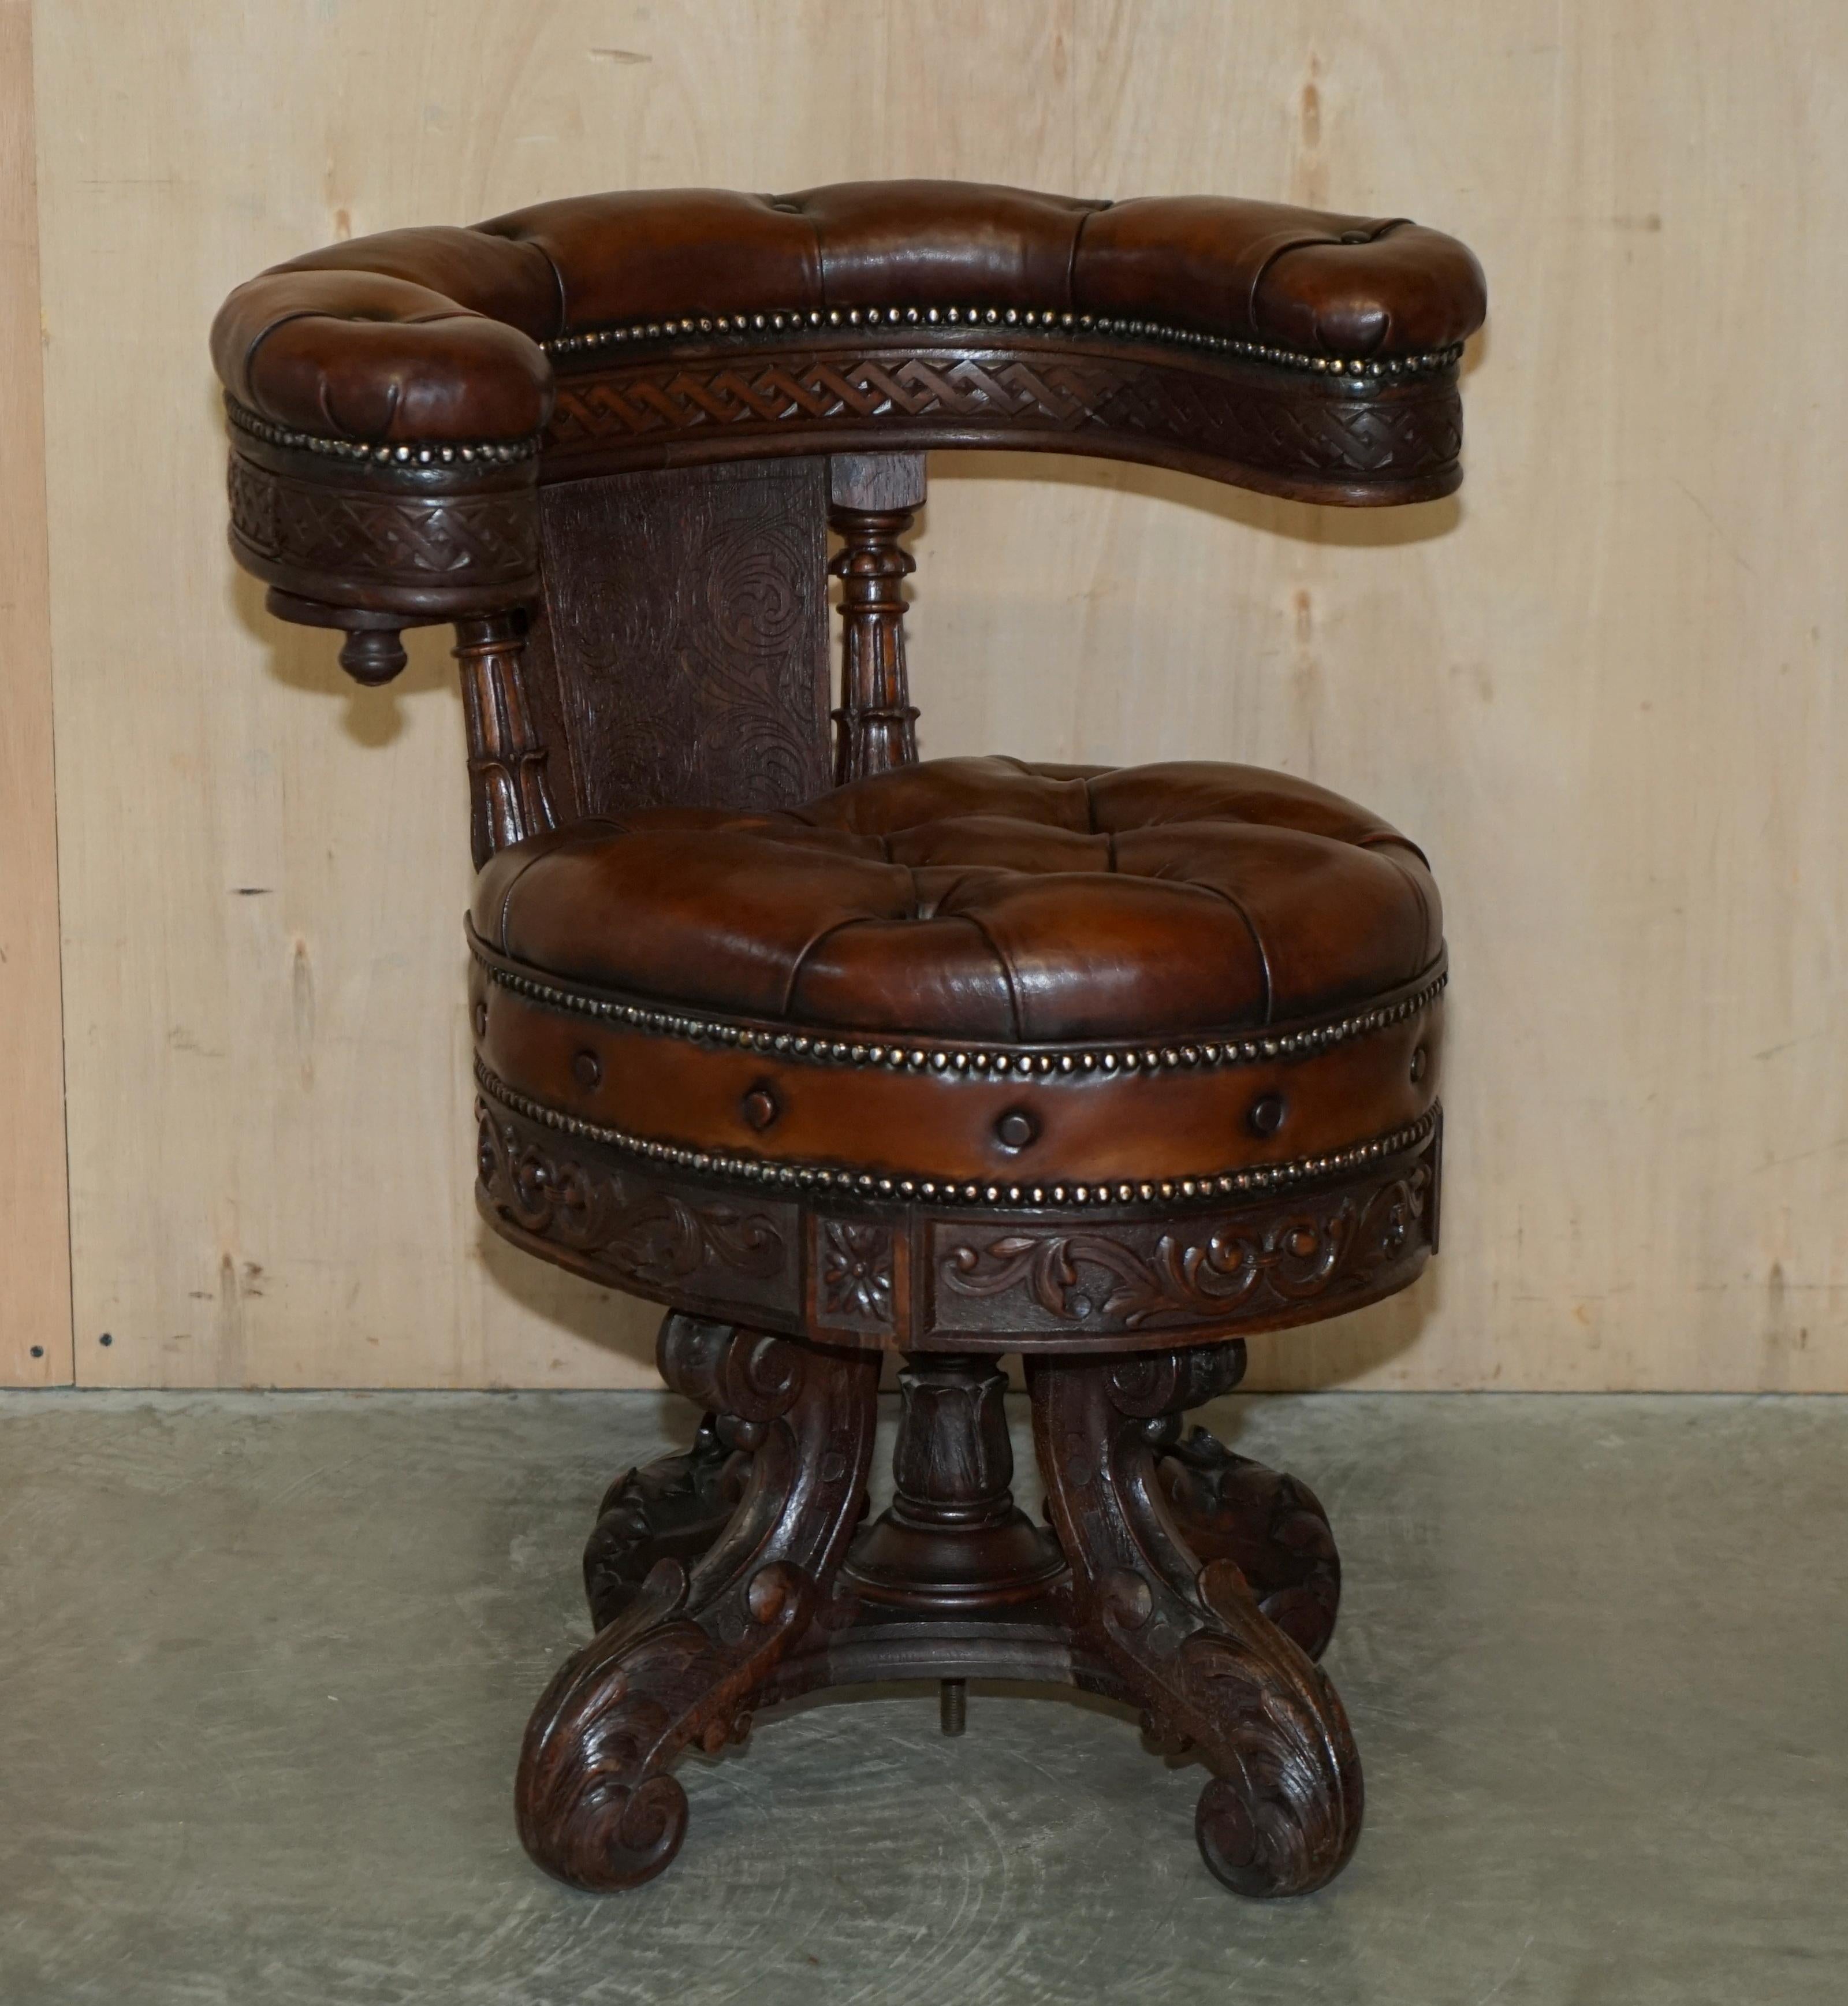 We are elighted to offer for sale this important handmade made in England, fully restored, circa 1830-1850 Cockfighting metamorphic swivel armchair 

This really is an exquisite armchair, it is pure art furniture from every angle, the chair is